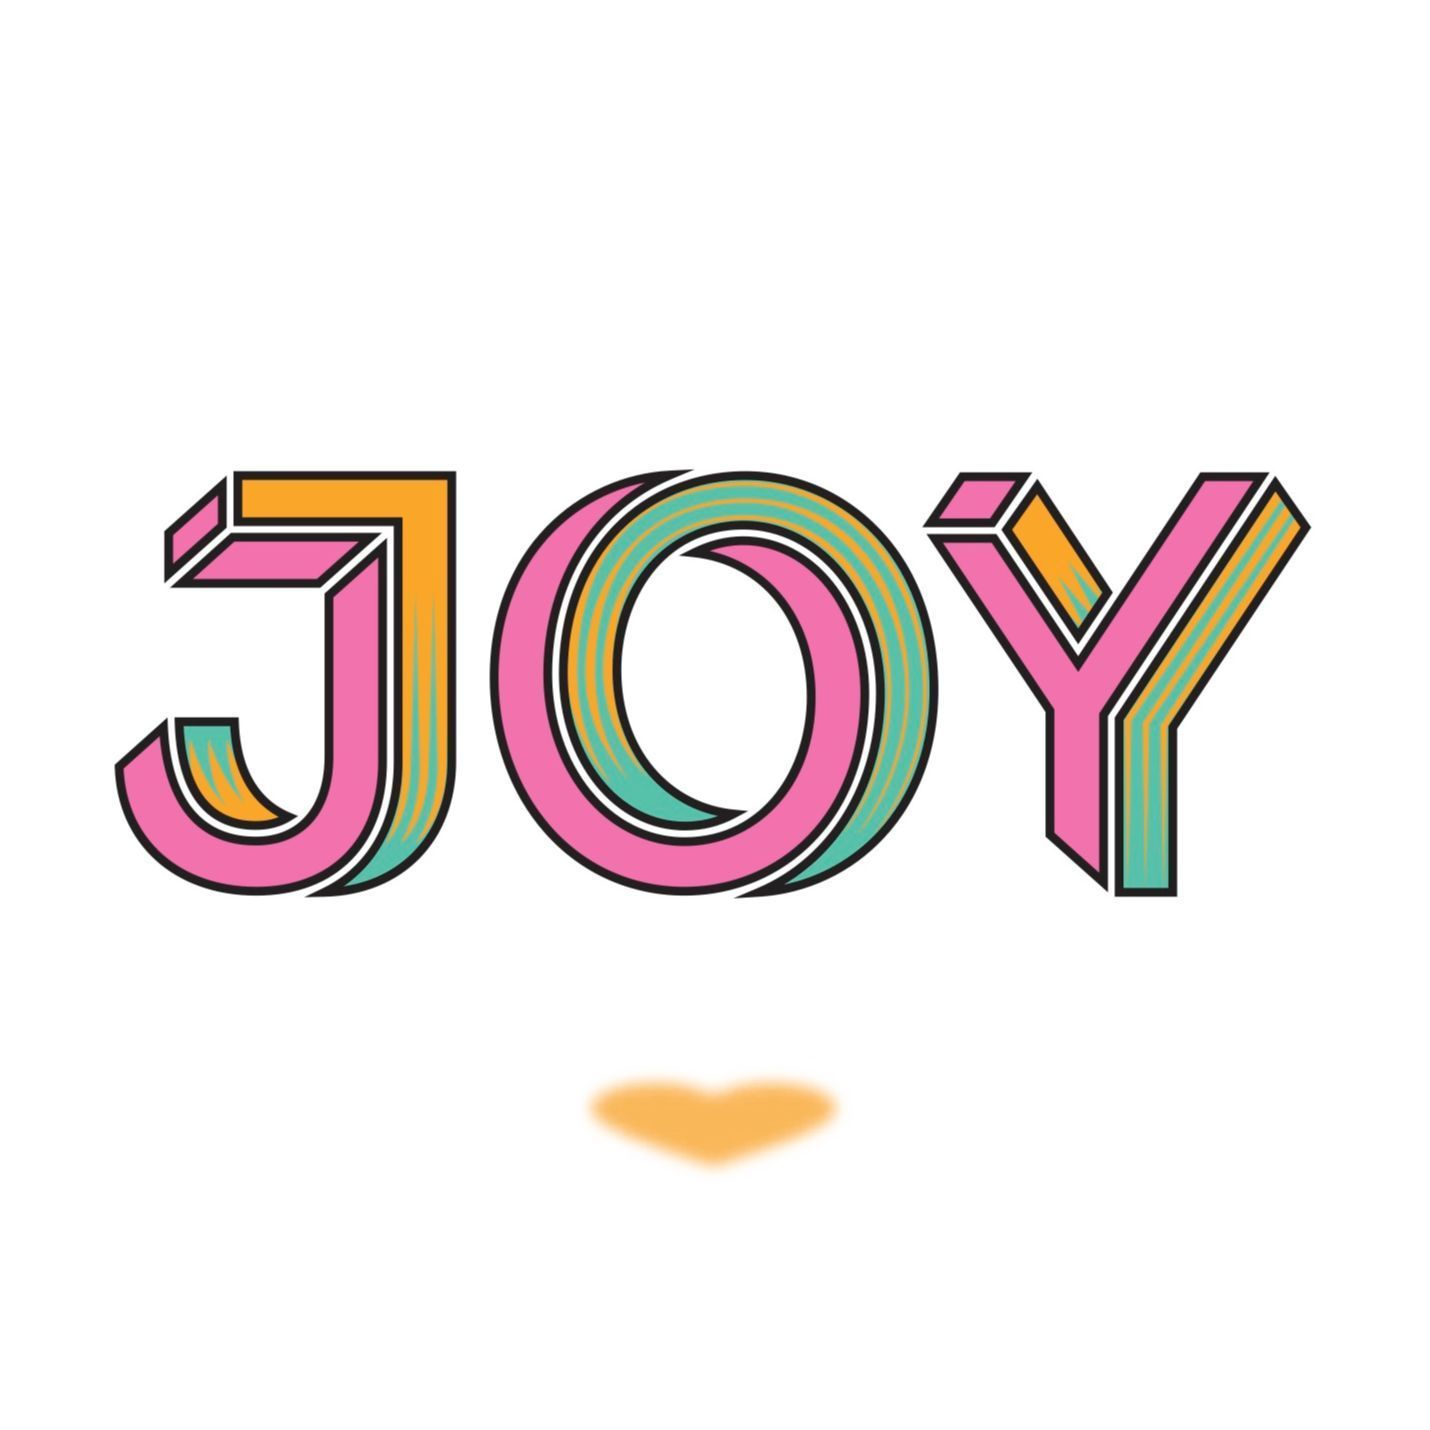 Joy by Sophie RN, 571 Wilbraham Road, M21 0AG, Manchester